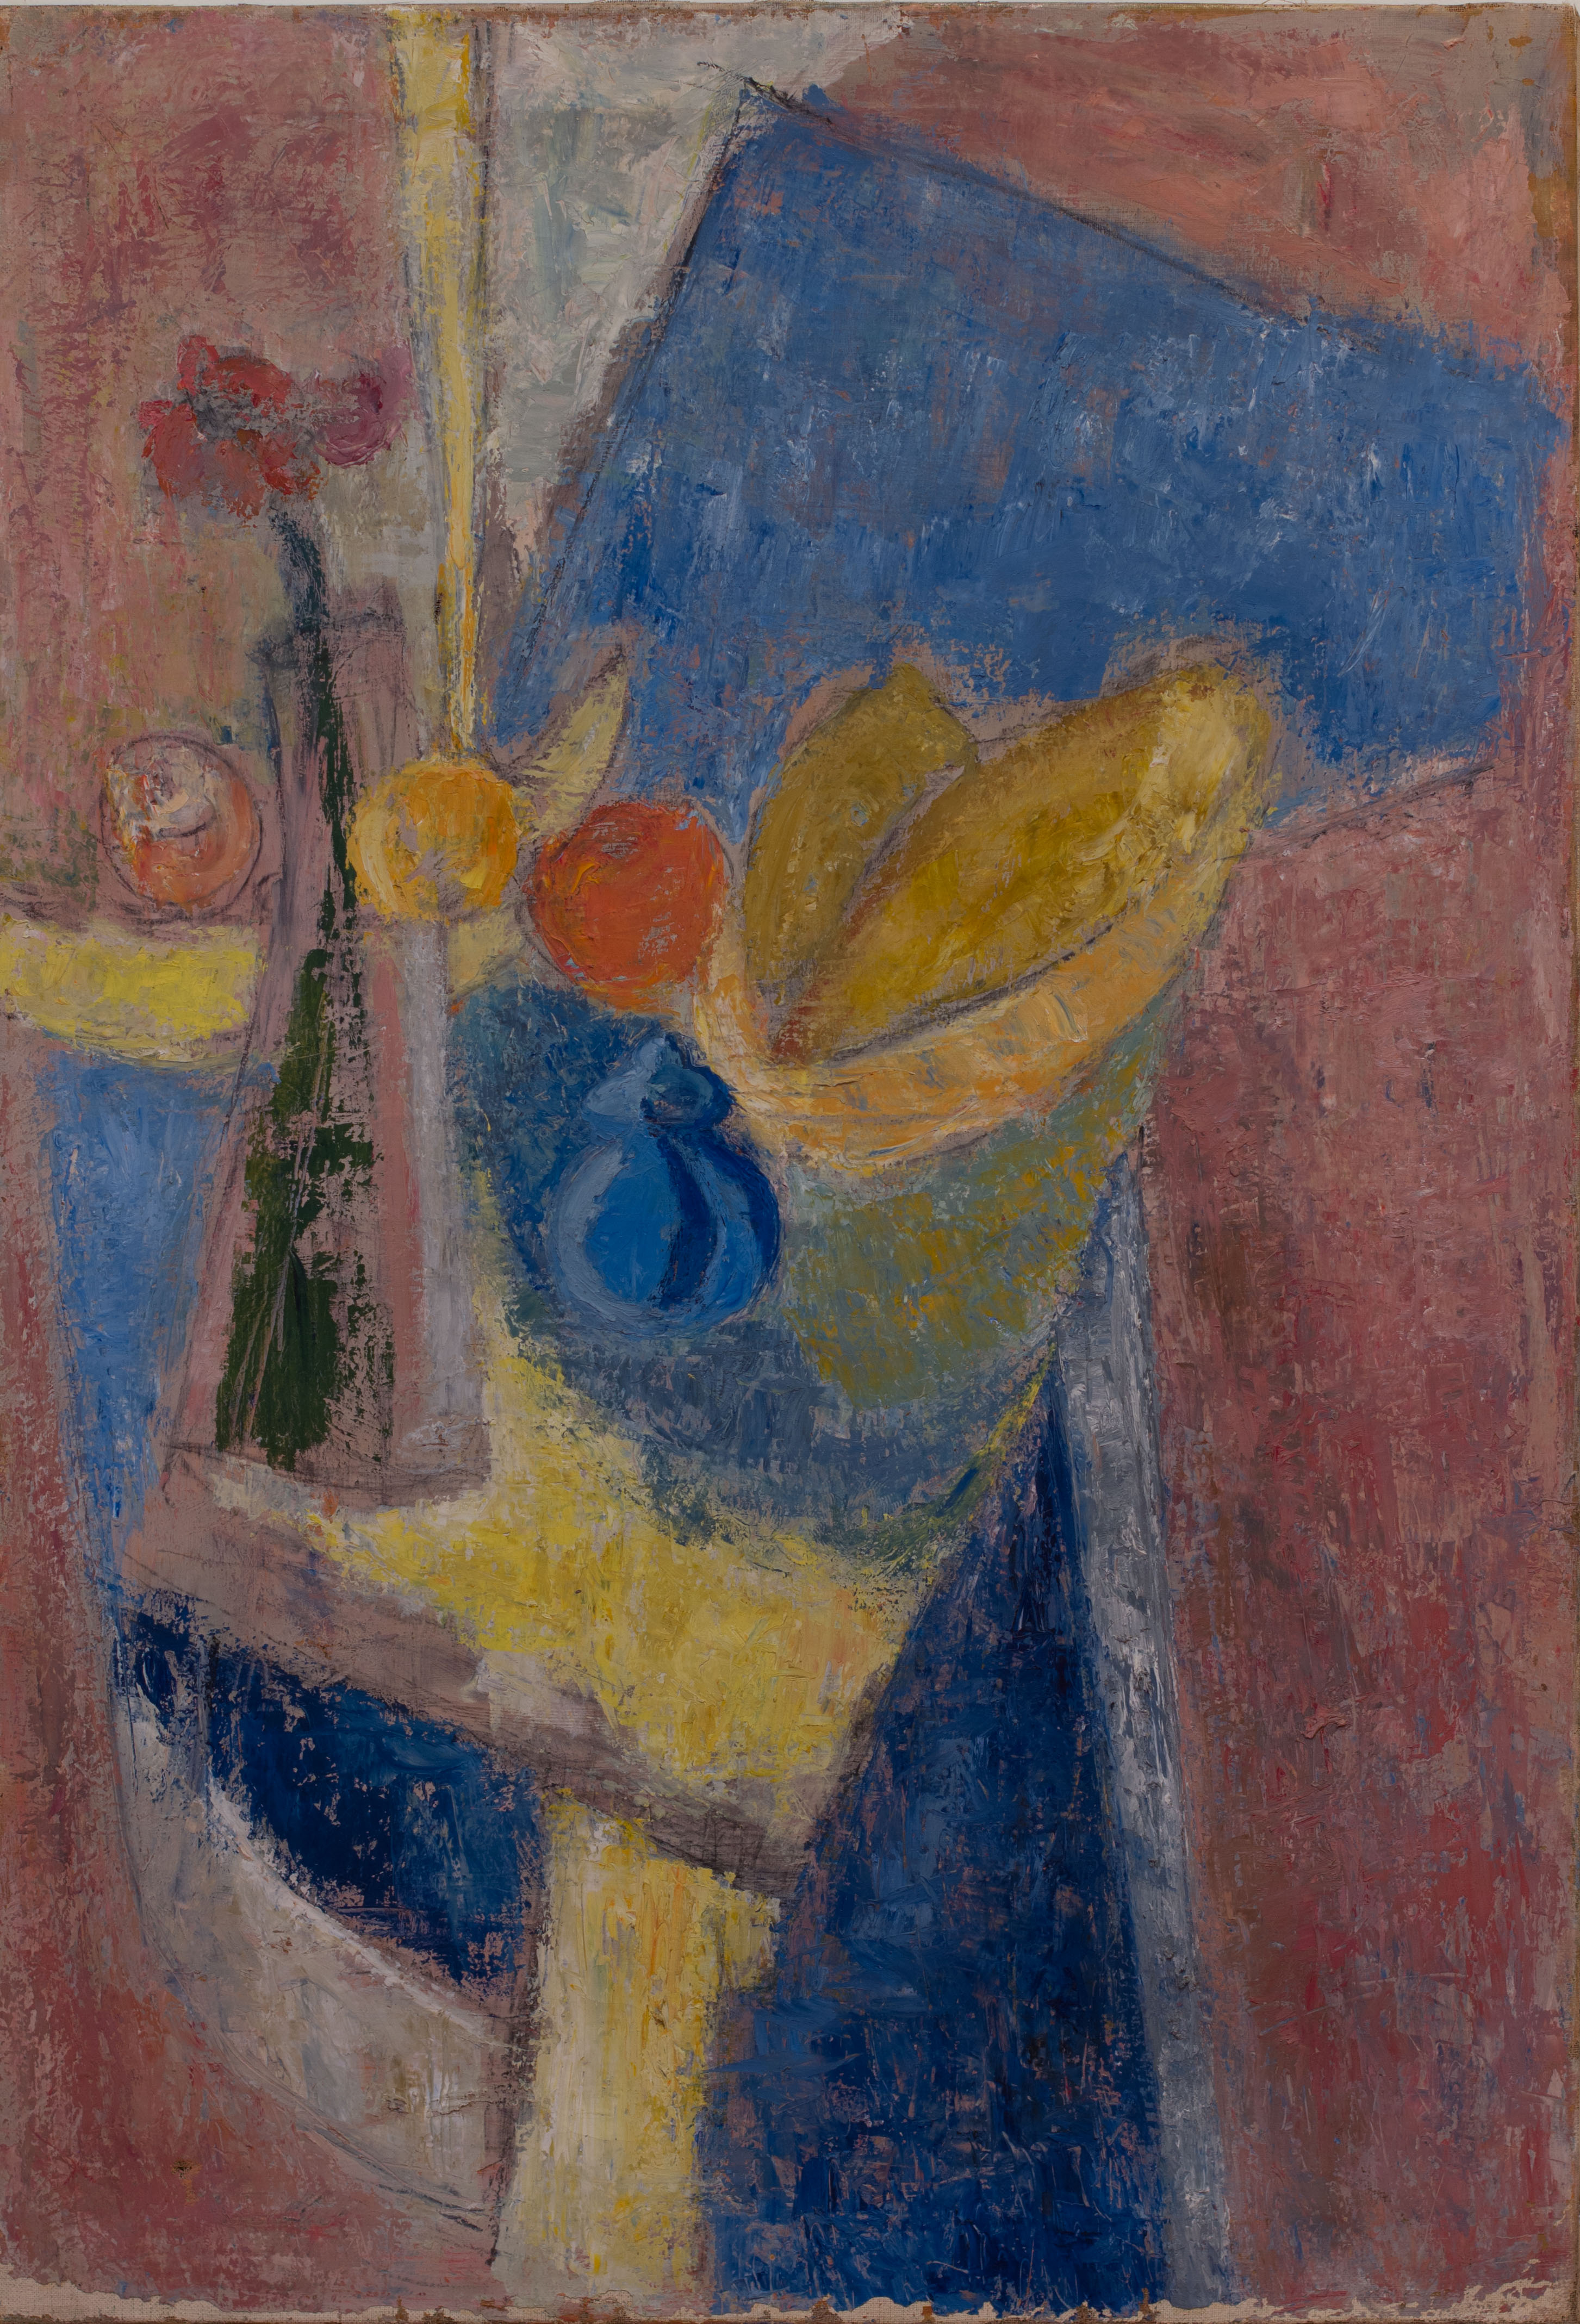 Painting: Still Life (#73) by Eleanor Hilowitz (1913 - 2007)